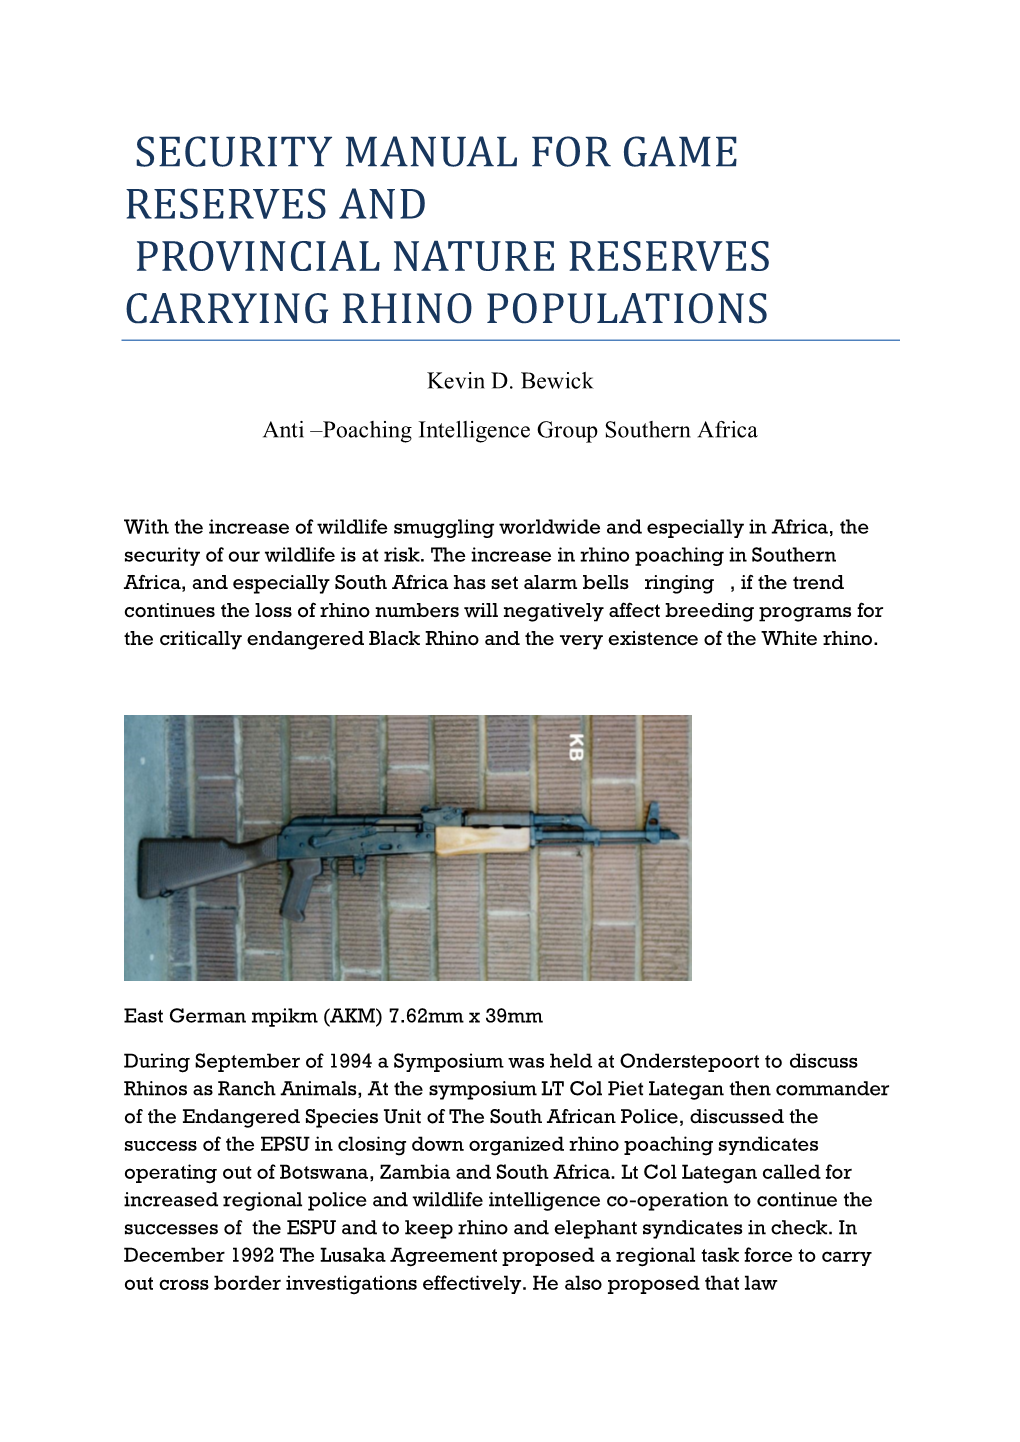 Security Manual for Game Reserves and Provincial Nature Reserves Carrying Rhino Populations